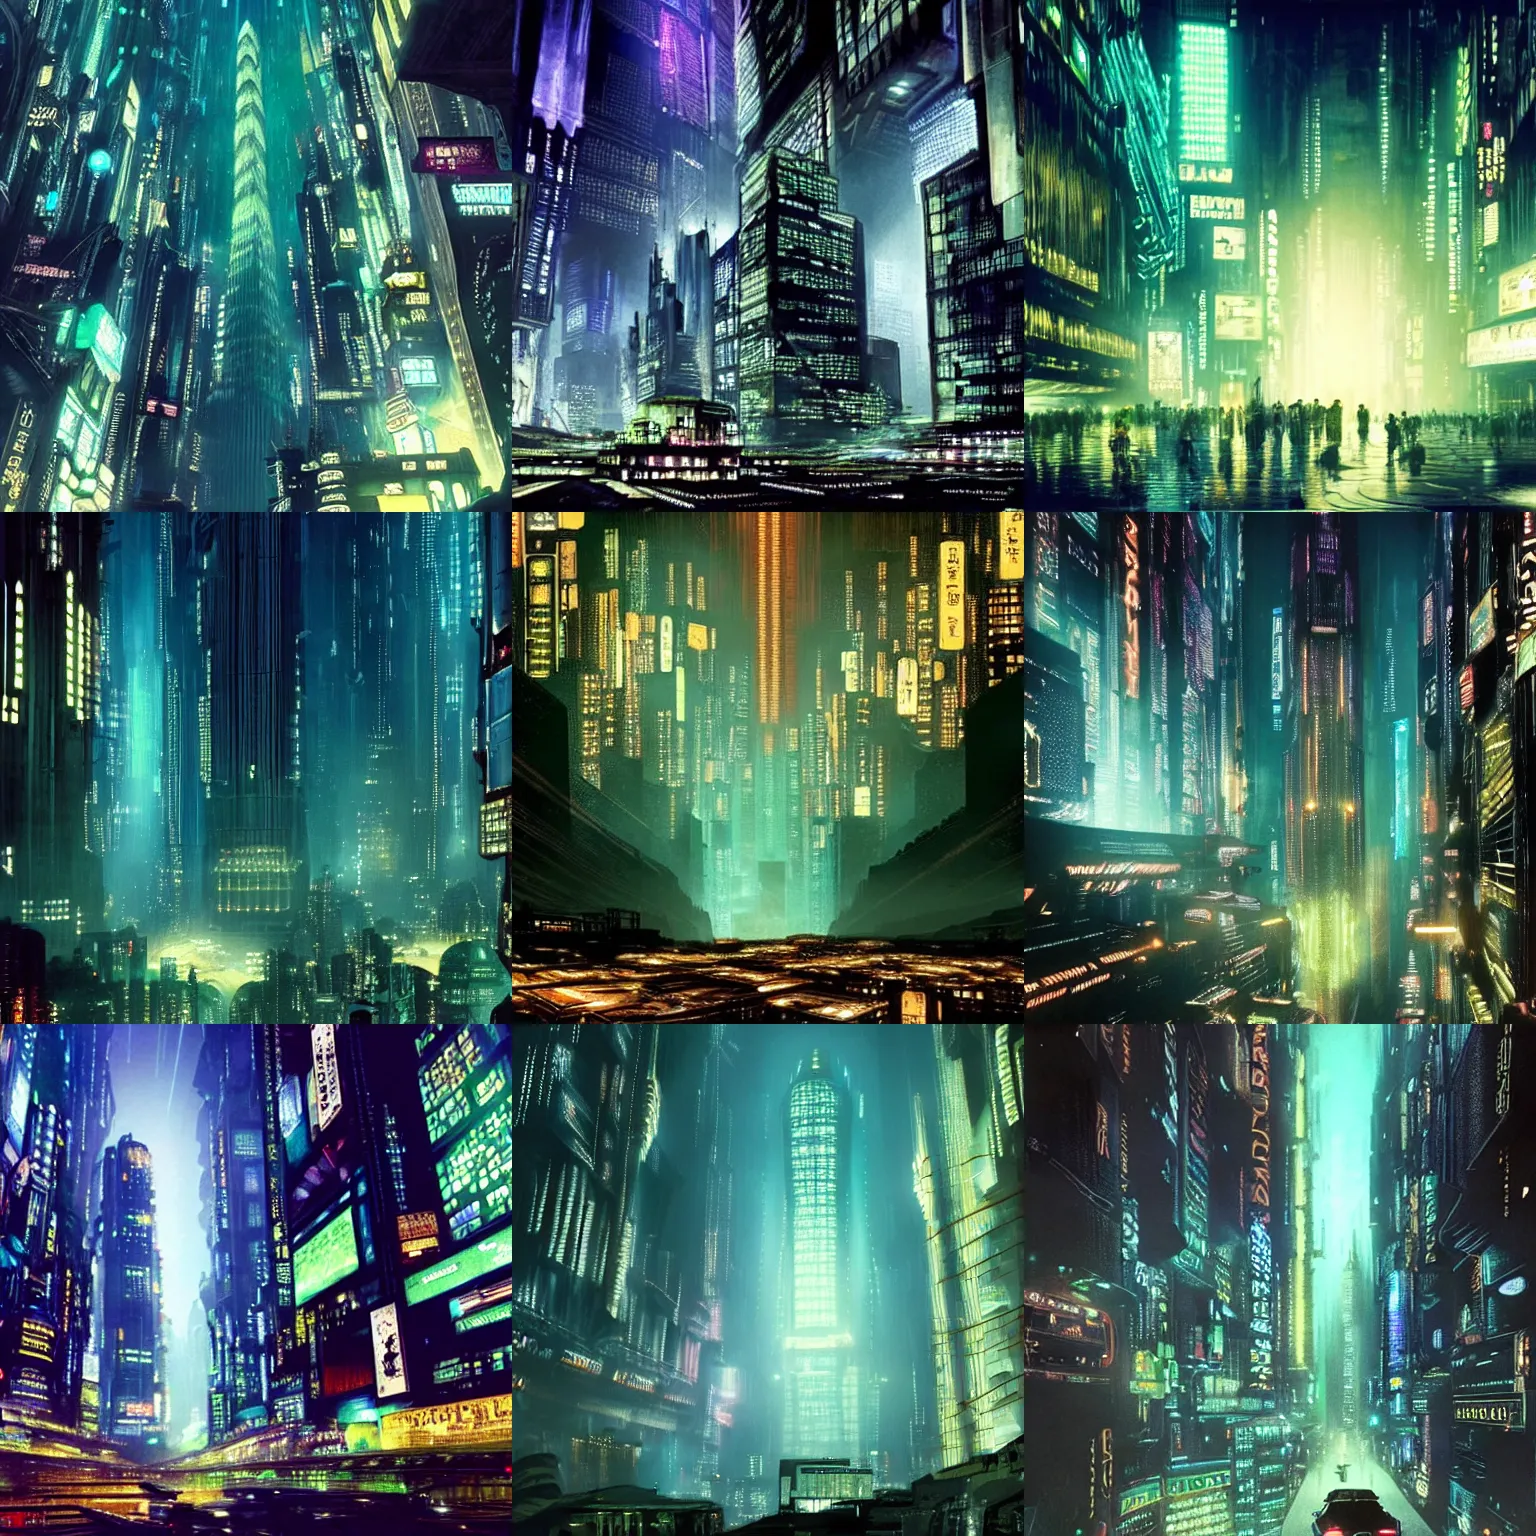 Prompt: a grand city at night with beautiful skyscrapers with glowing lights and green spaces, all inside an enormous cavern, cavern ceiling visible, bladerunner cinematic still